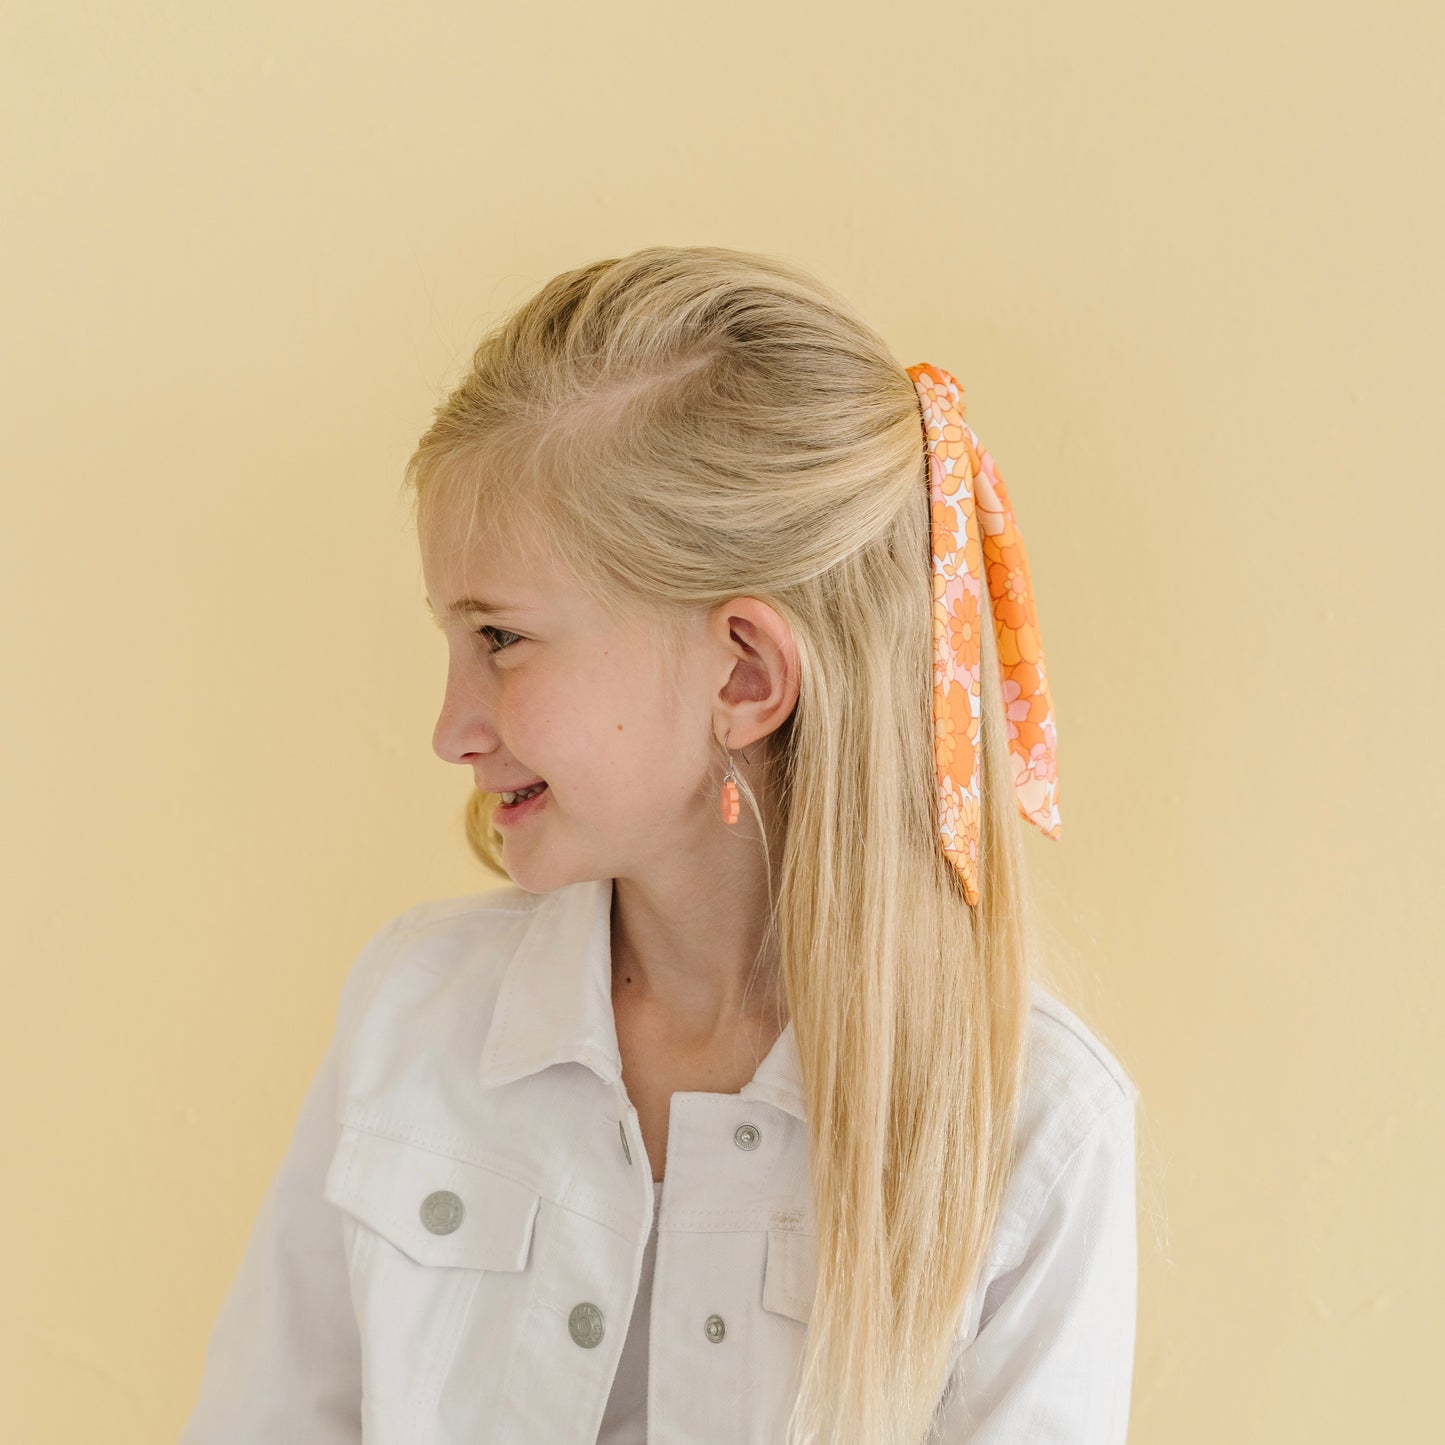 THE HAIR SCARF in Grandma’s Floral/ Statement Hair Accessory